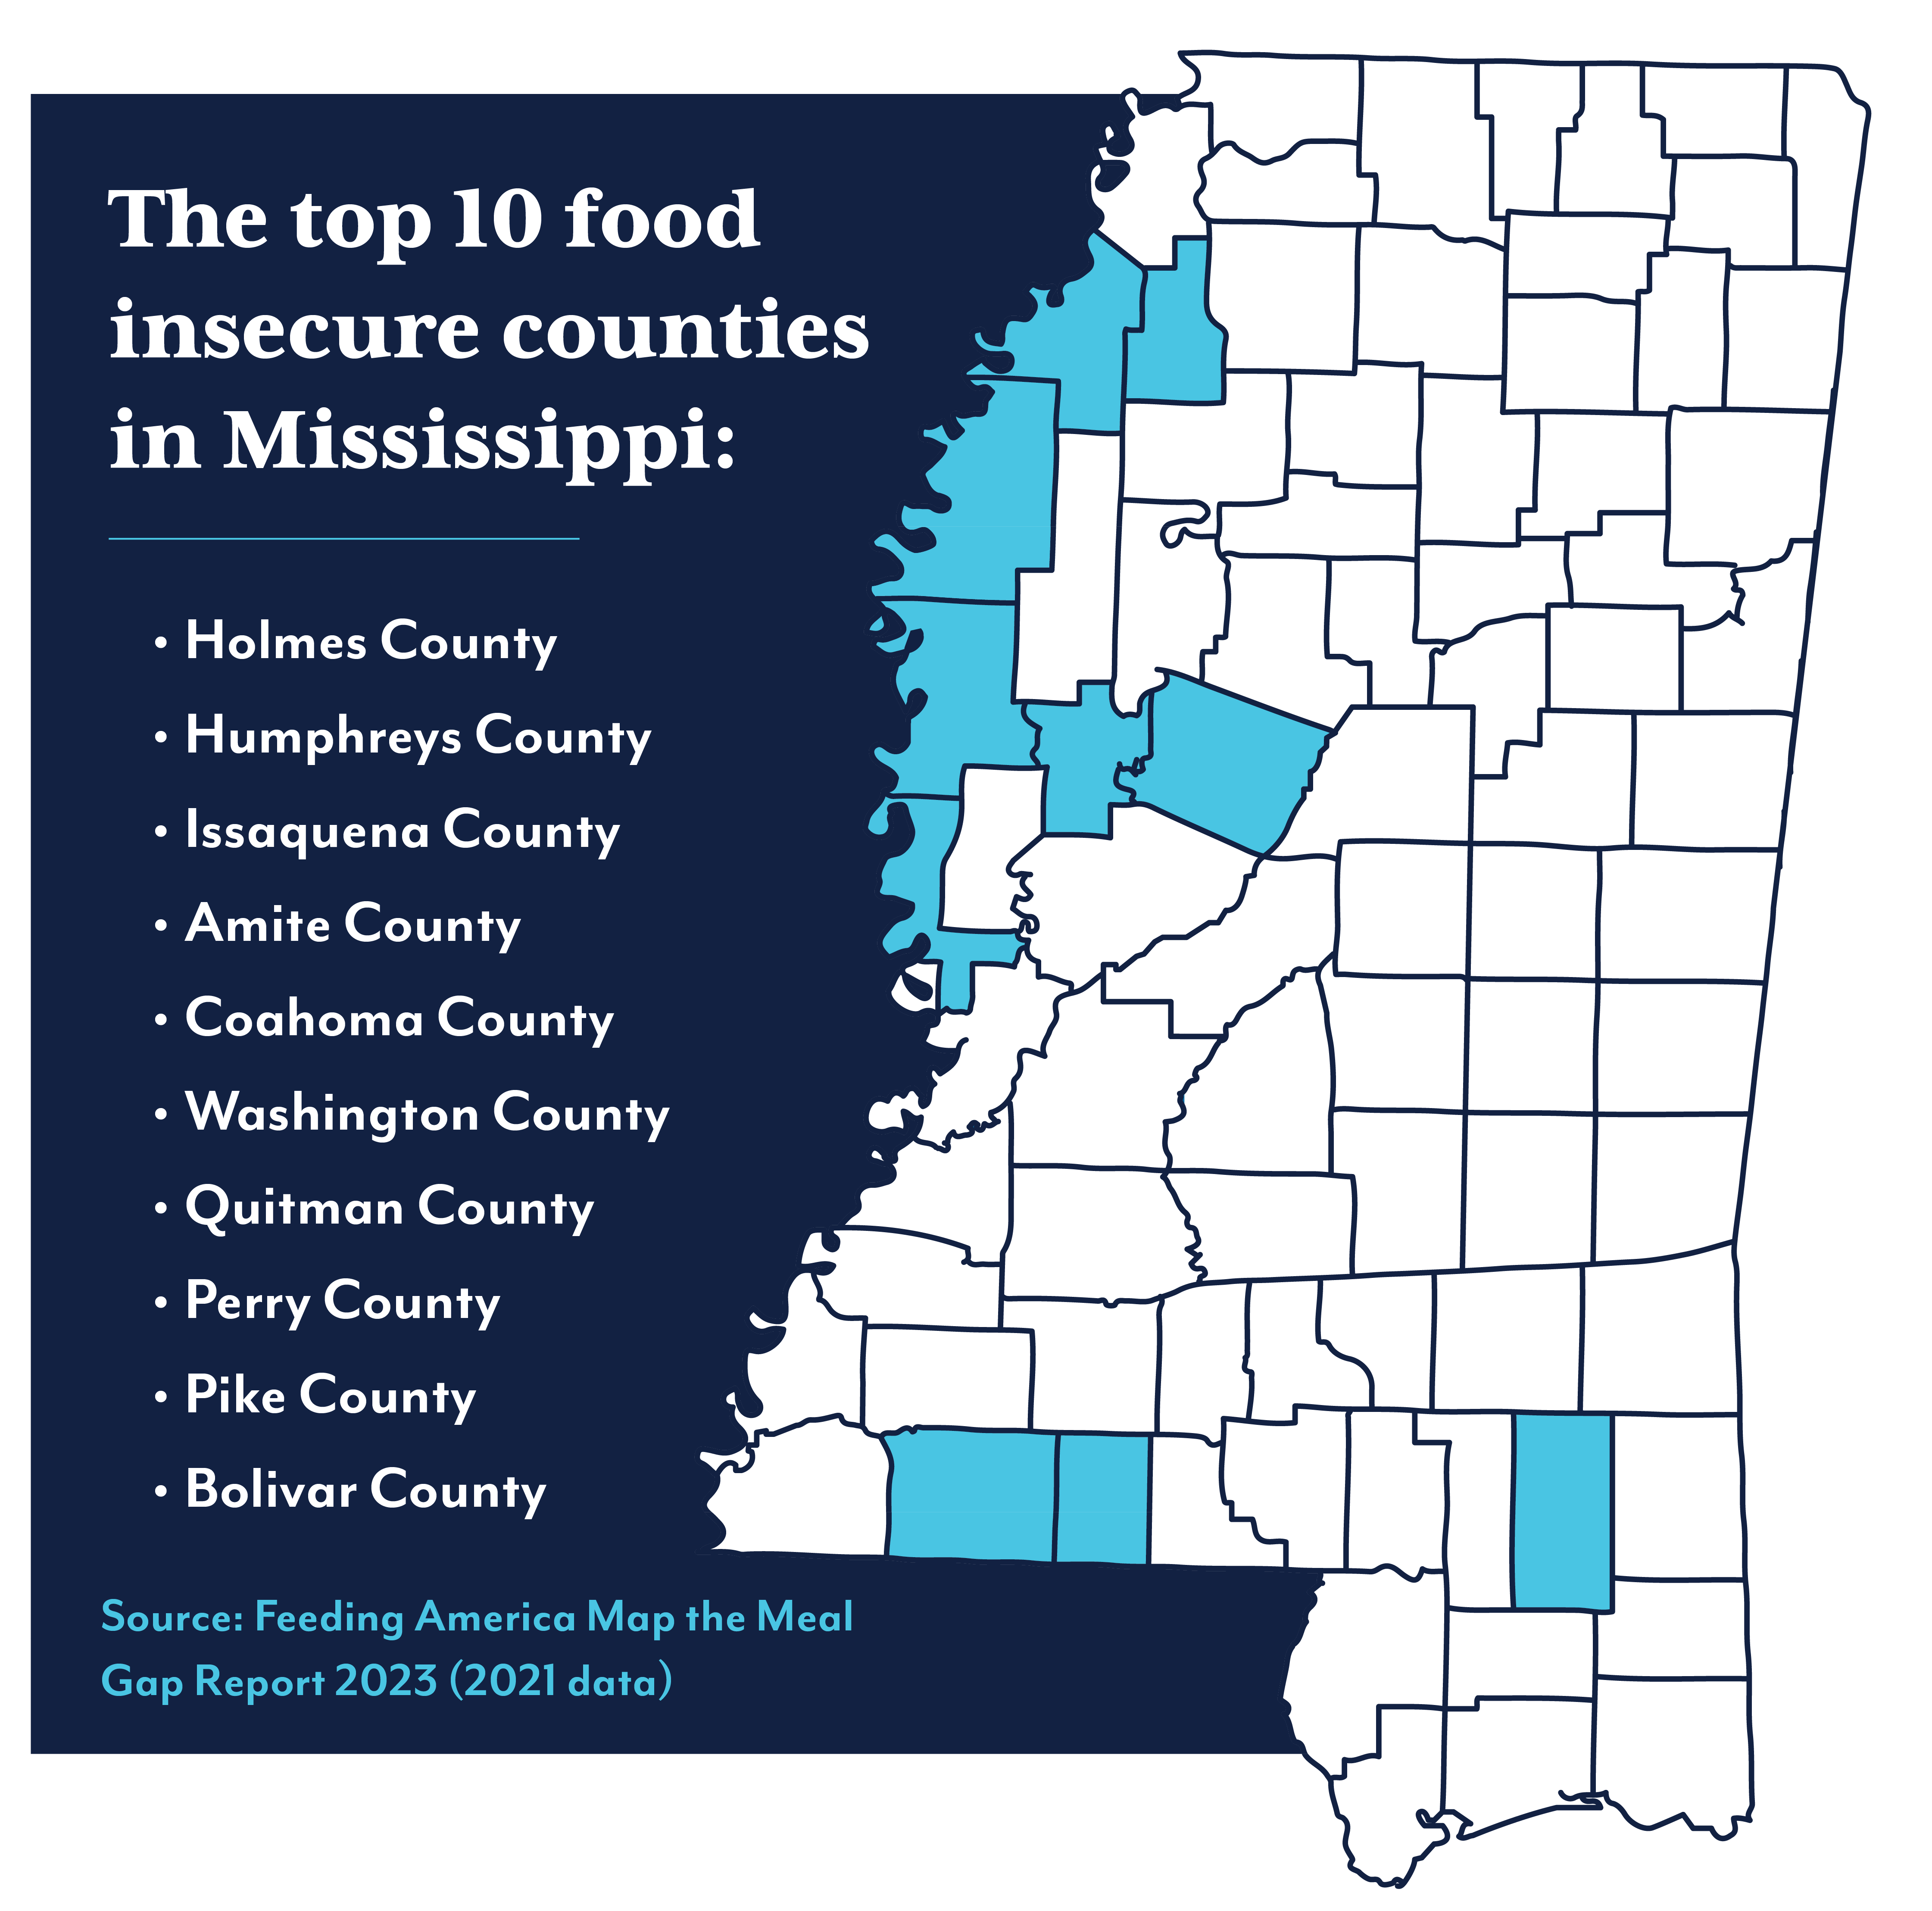 A graphic showing the top 10 food insecure counties in Mississippi: Holmes County, Humphreys County, Issaquena County, Amite County, Coahoma County, Washington County, Quitman County, Perry County, Pike County, Bolivar County